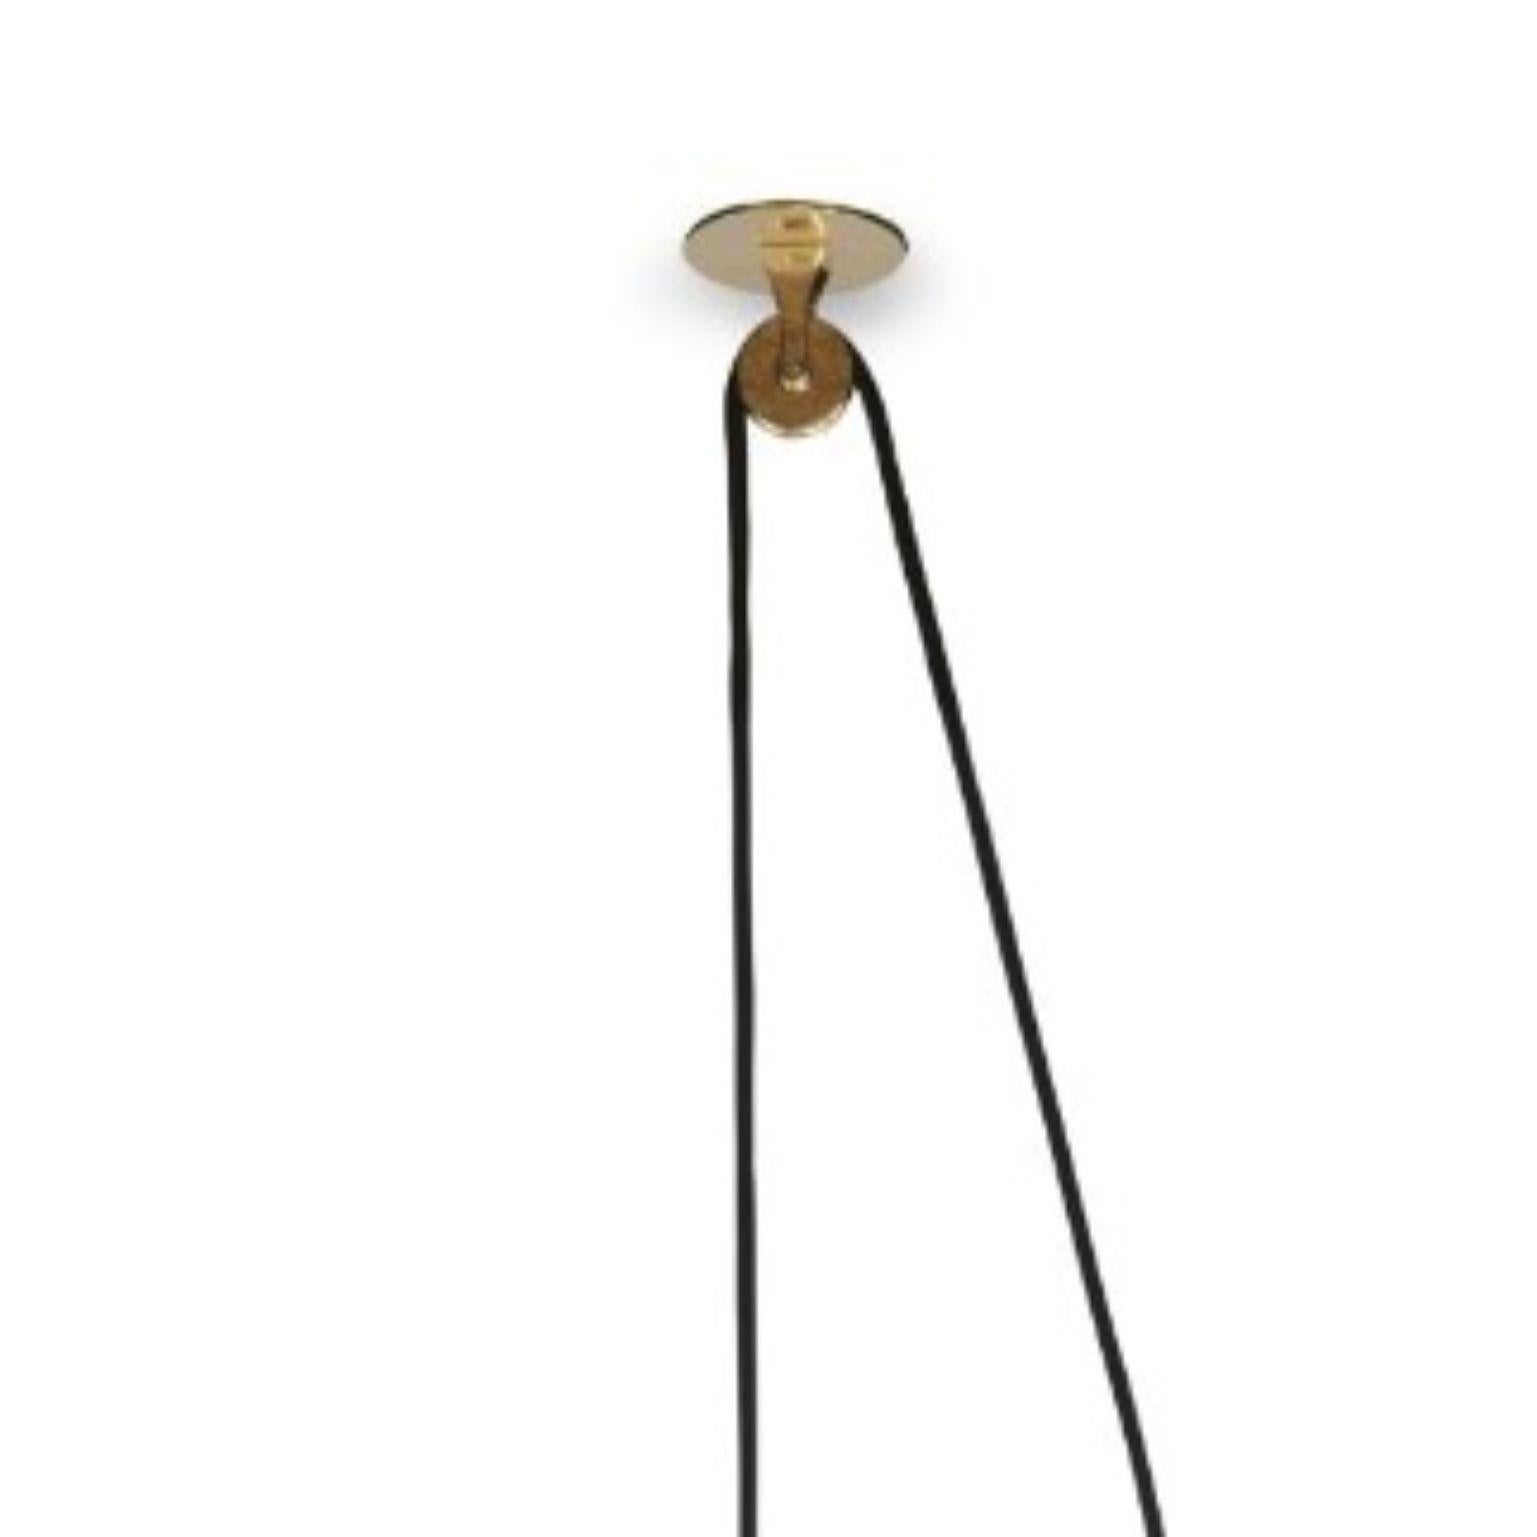 Revolve rise and fall pendant light - Brushed brass - Blue by Bert Frank
Dimensions: 30 x 35 x 11 cm, small lamp: 7.6 cm
Materials: Brass, steel

Also available in polished brass.
When Adam Yeats and Robbie Llewellyn founded Bert Frank in 2013